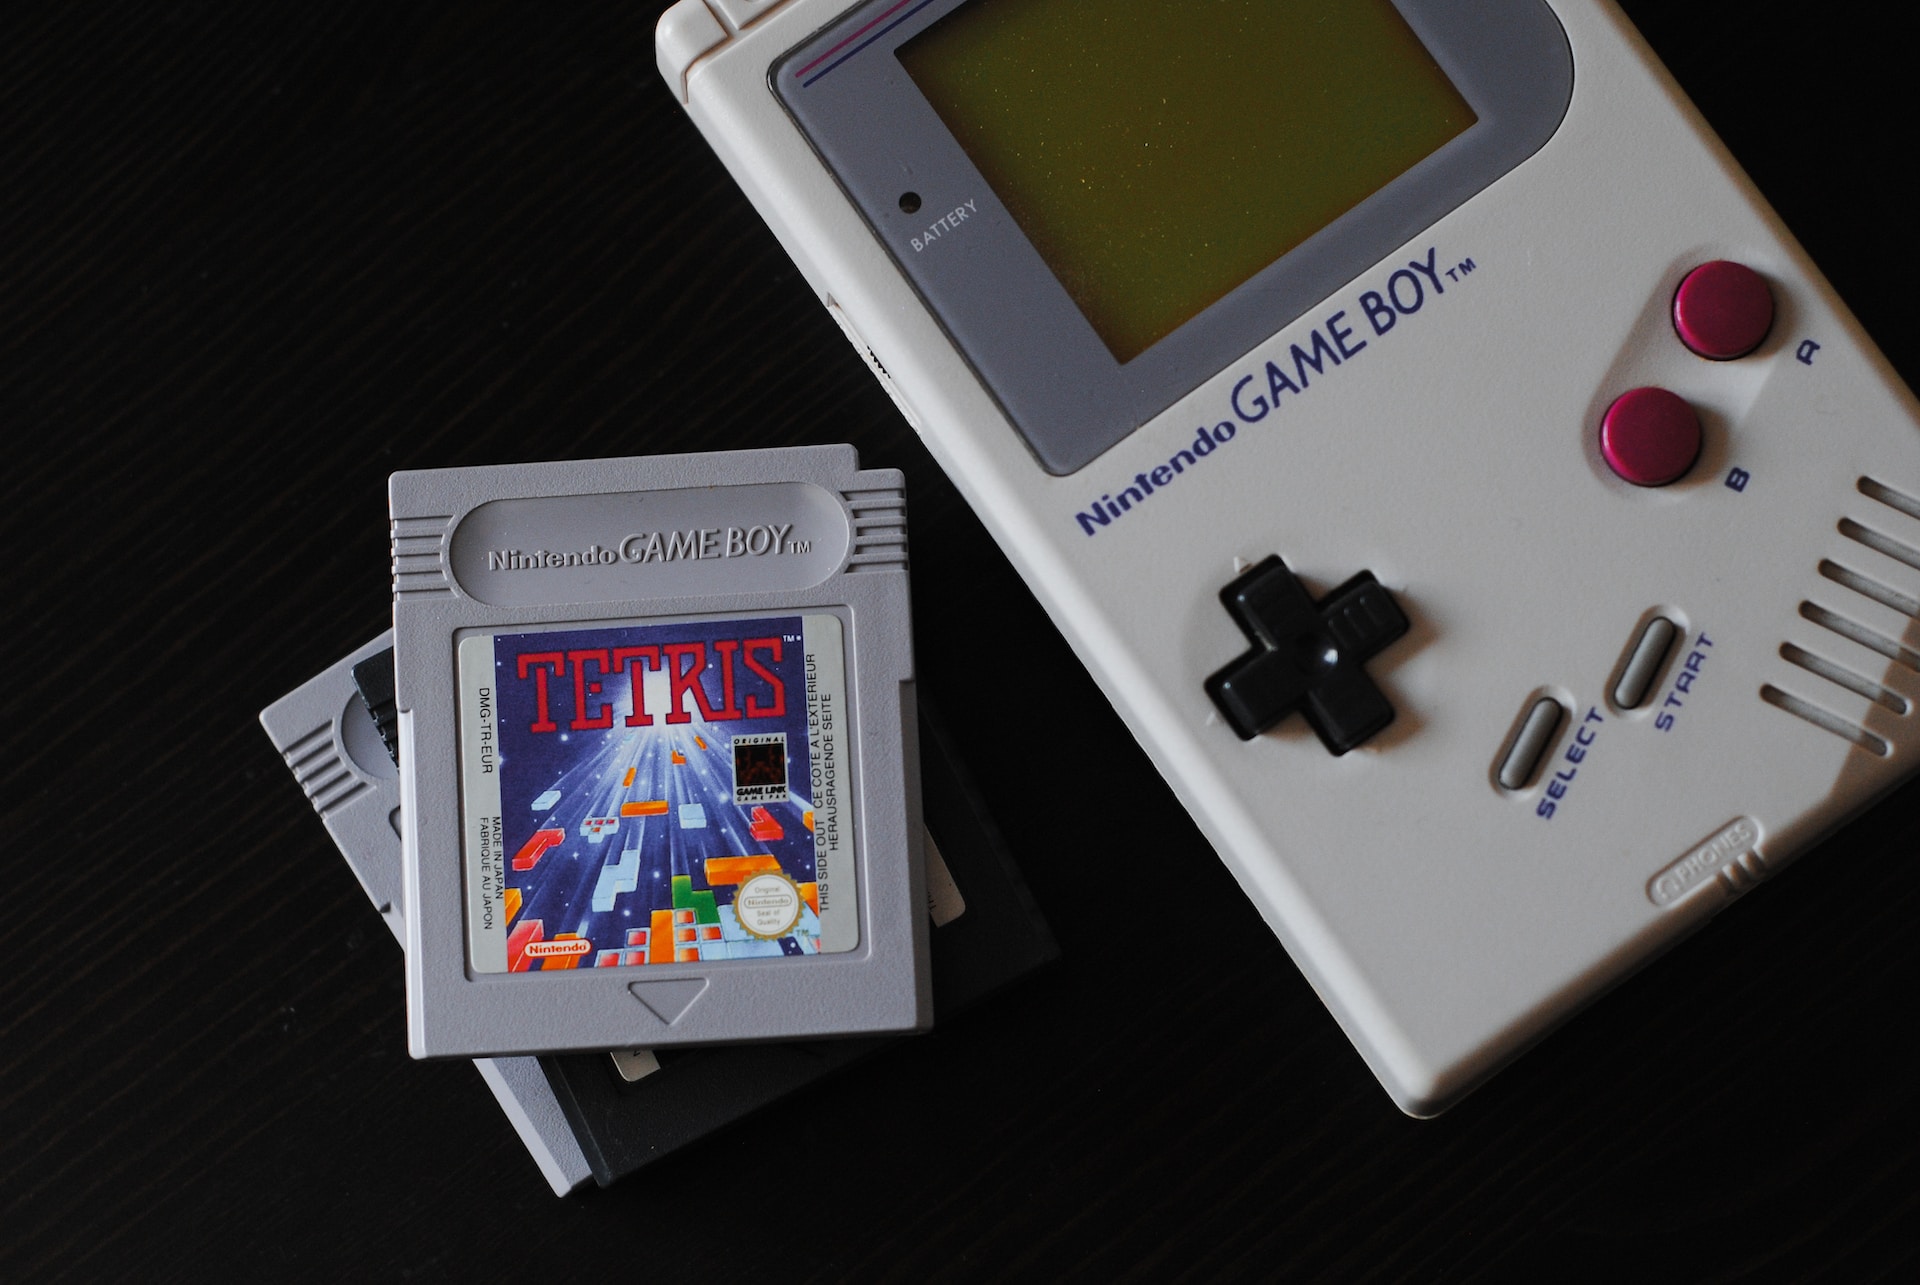 Gray-colored GameBoy and Tetris